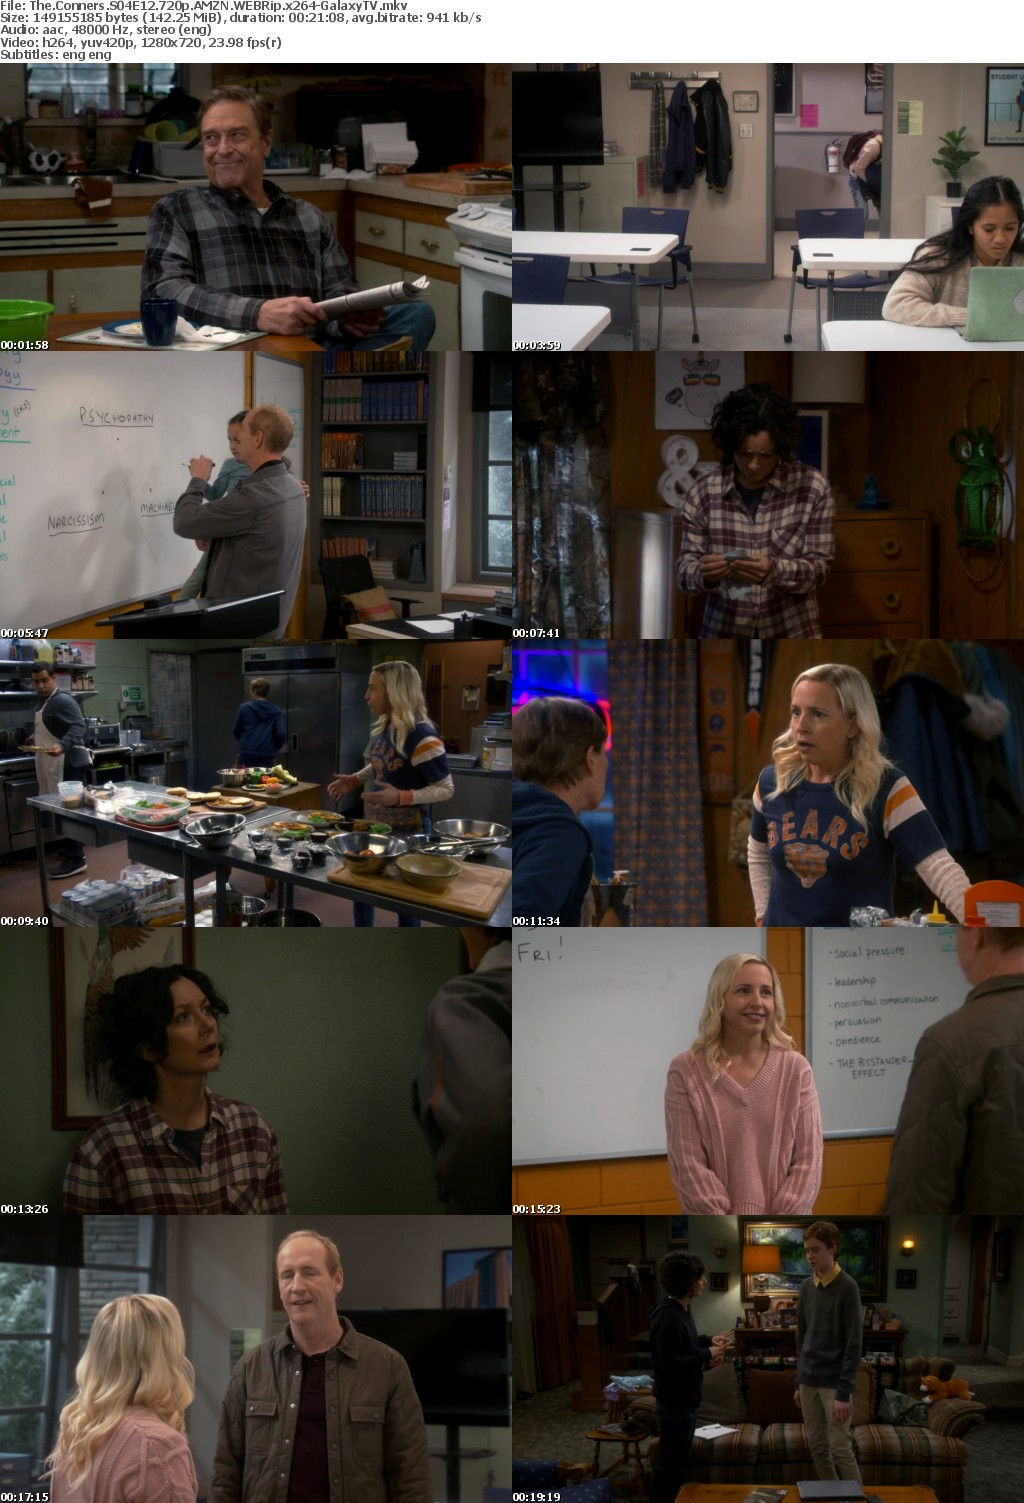 The Conners S04 COMPLETE 720p AMZN WEBRip x264-GalaxyTV